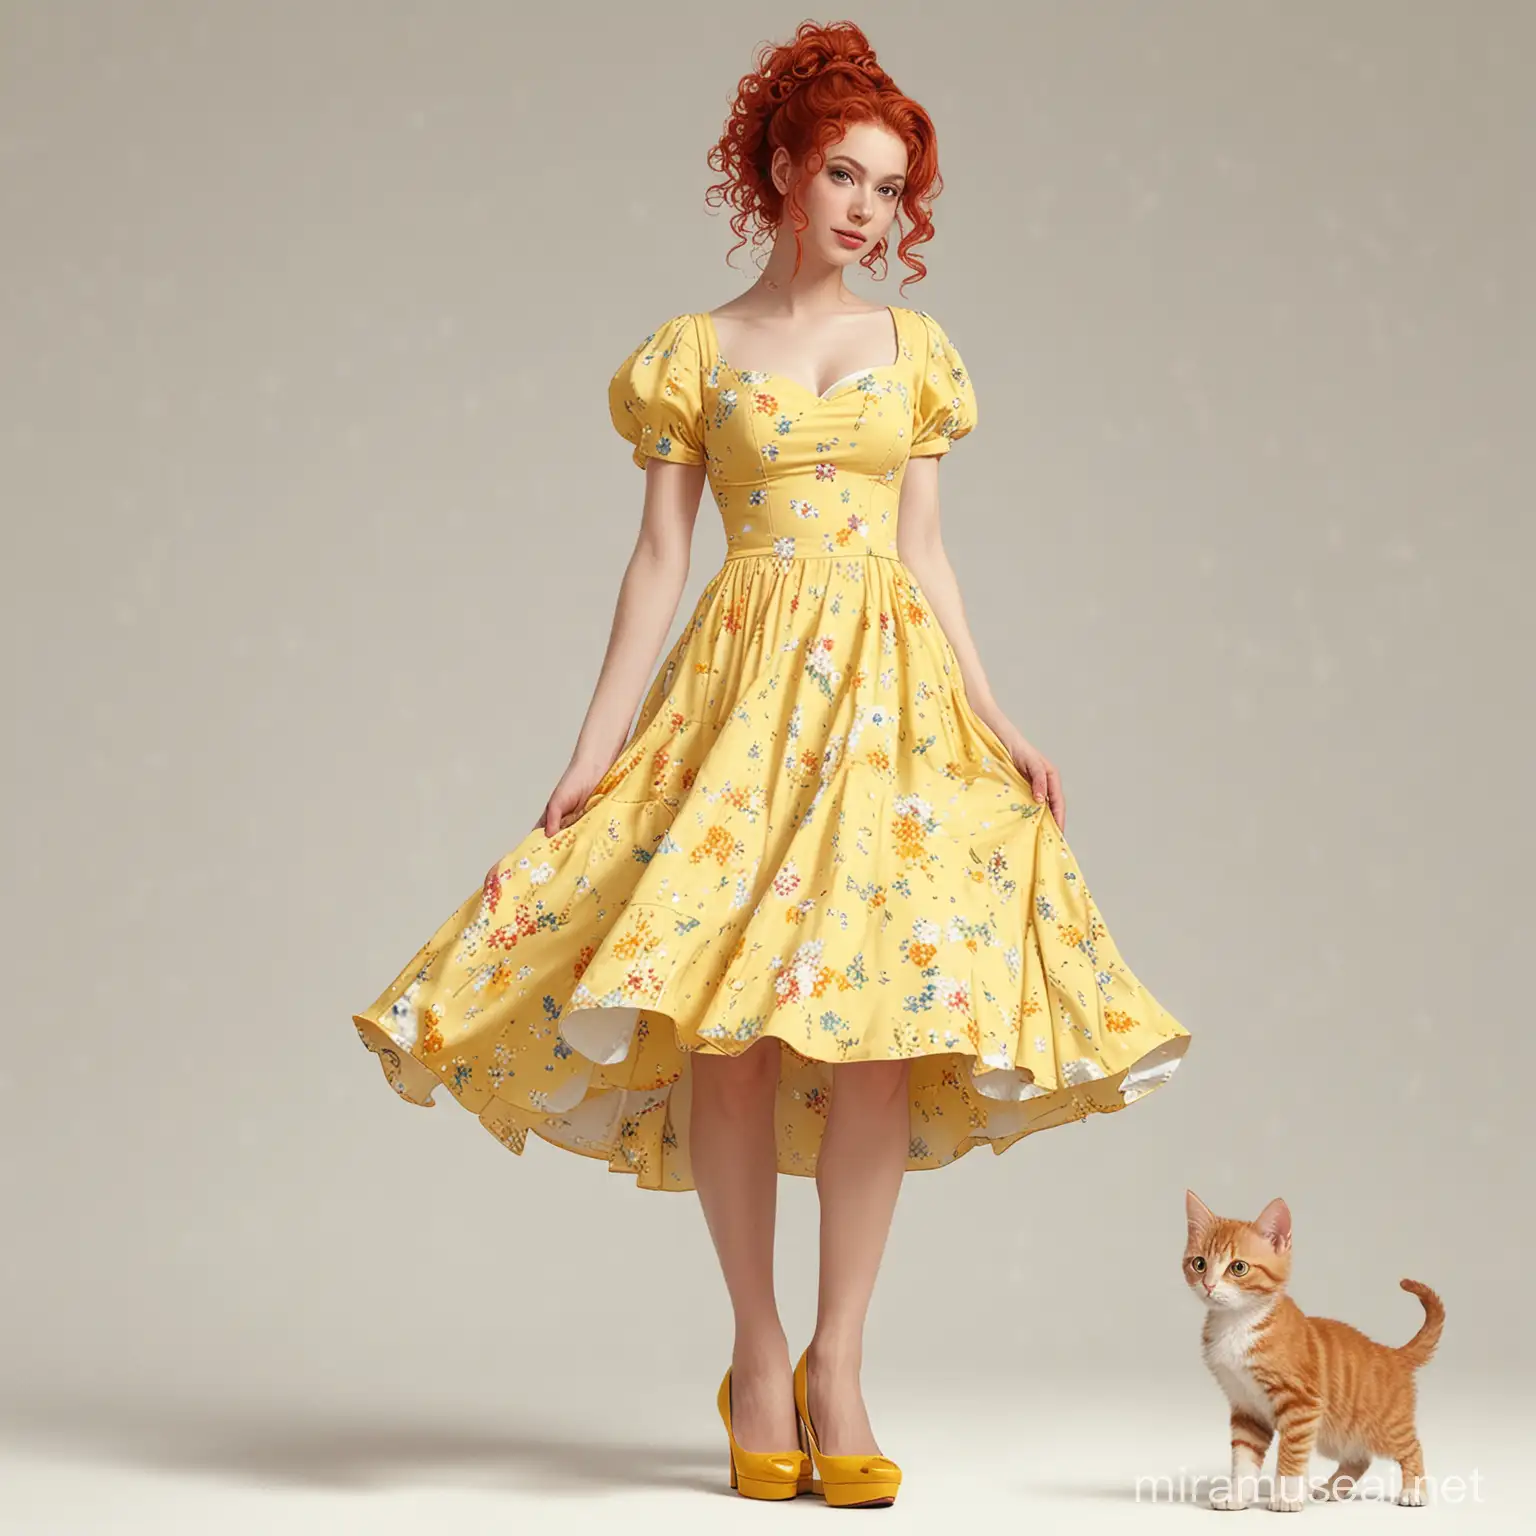 realistic full body shot of a beautiful young woman, red curly ponytail, spring dress in yellow, yellow pumps with high heels, with little kitten in her arms, cartoonish, inventive character designs, color settings, 
highly detailed digital art, fixed on white background, watercolor effect, james gurney art --v 5.2 --s 250
